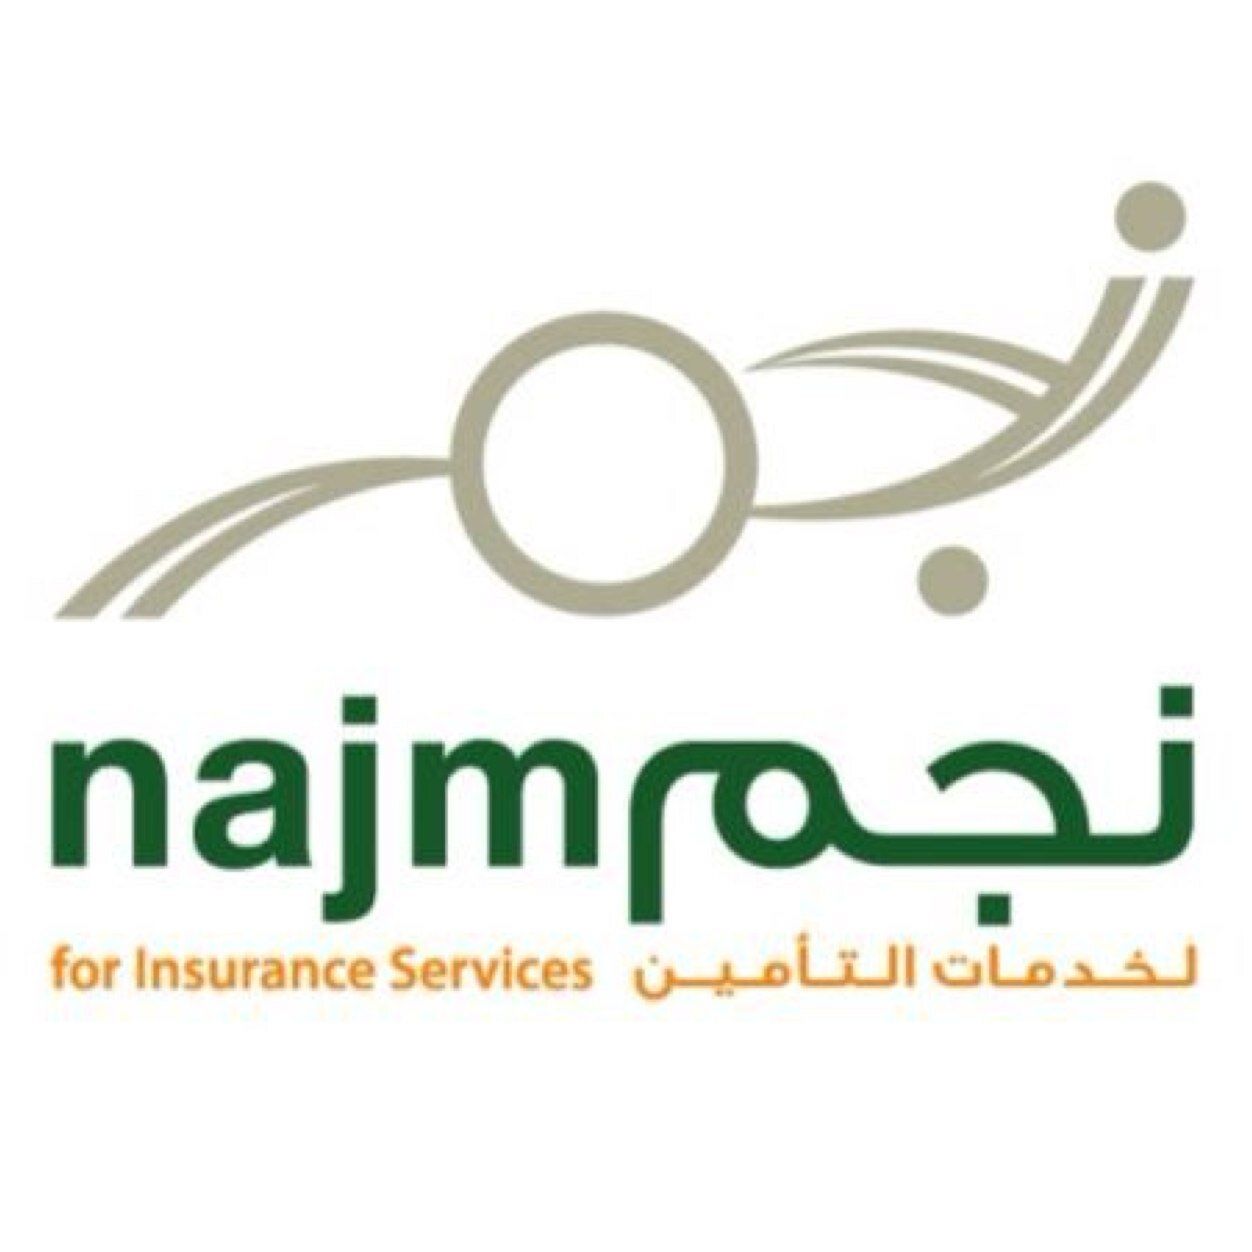 Najm for Insurance Services first insurance entity to receive Uptime Institute Tier III Constructed Facility certification across GCC